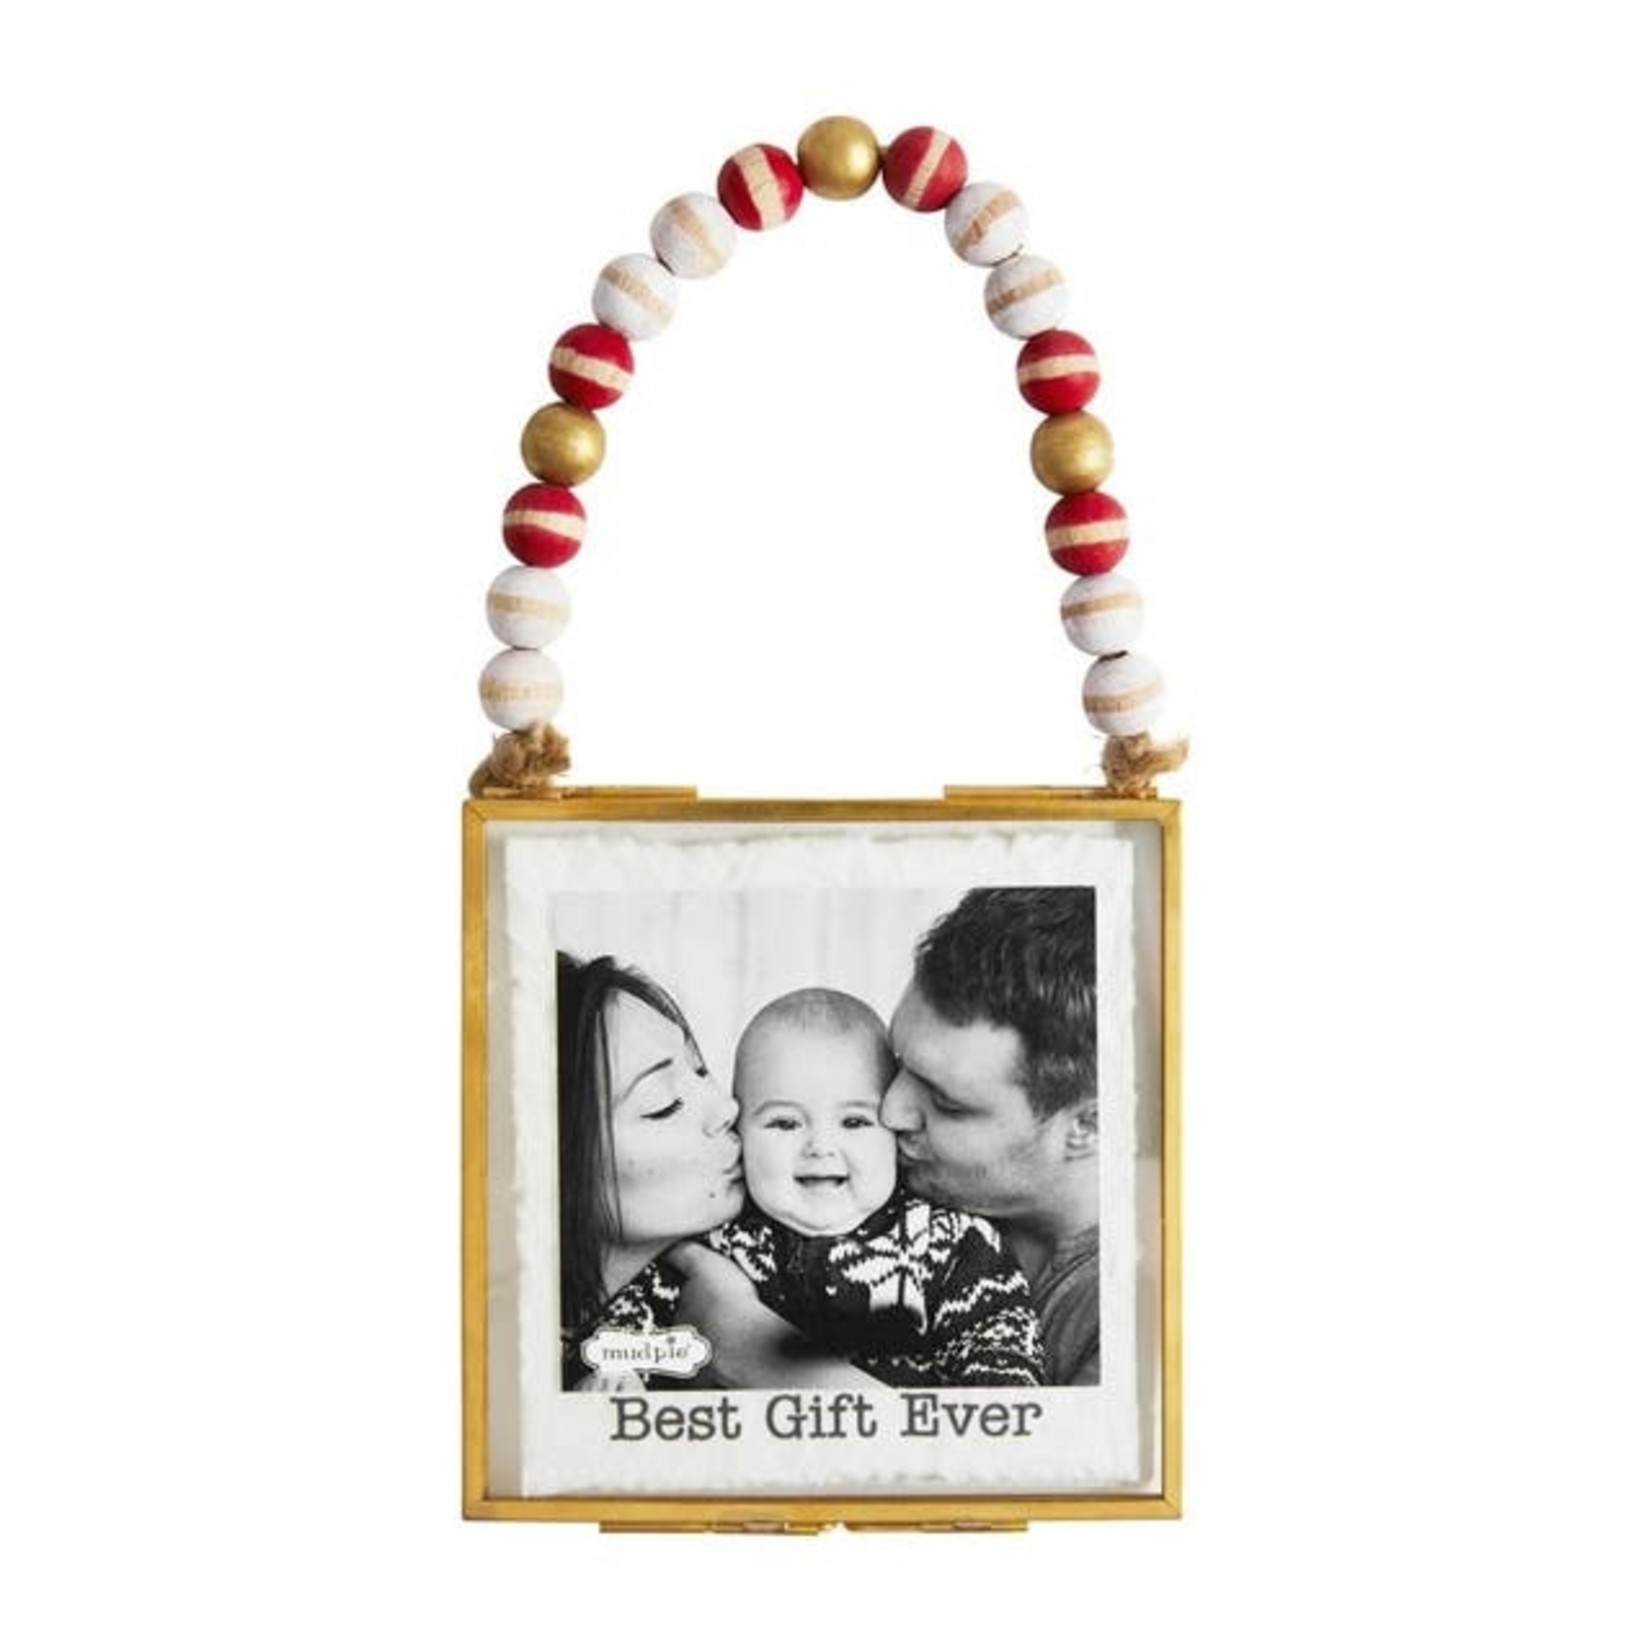 Mudpie Best Gift Ever Photo Frame Ornament